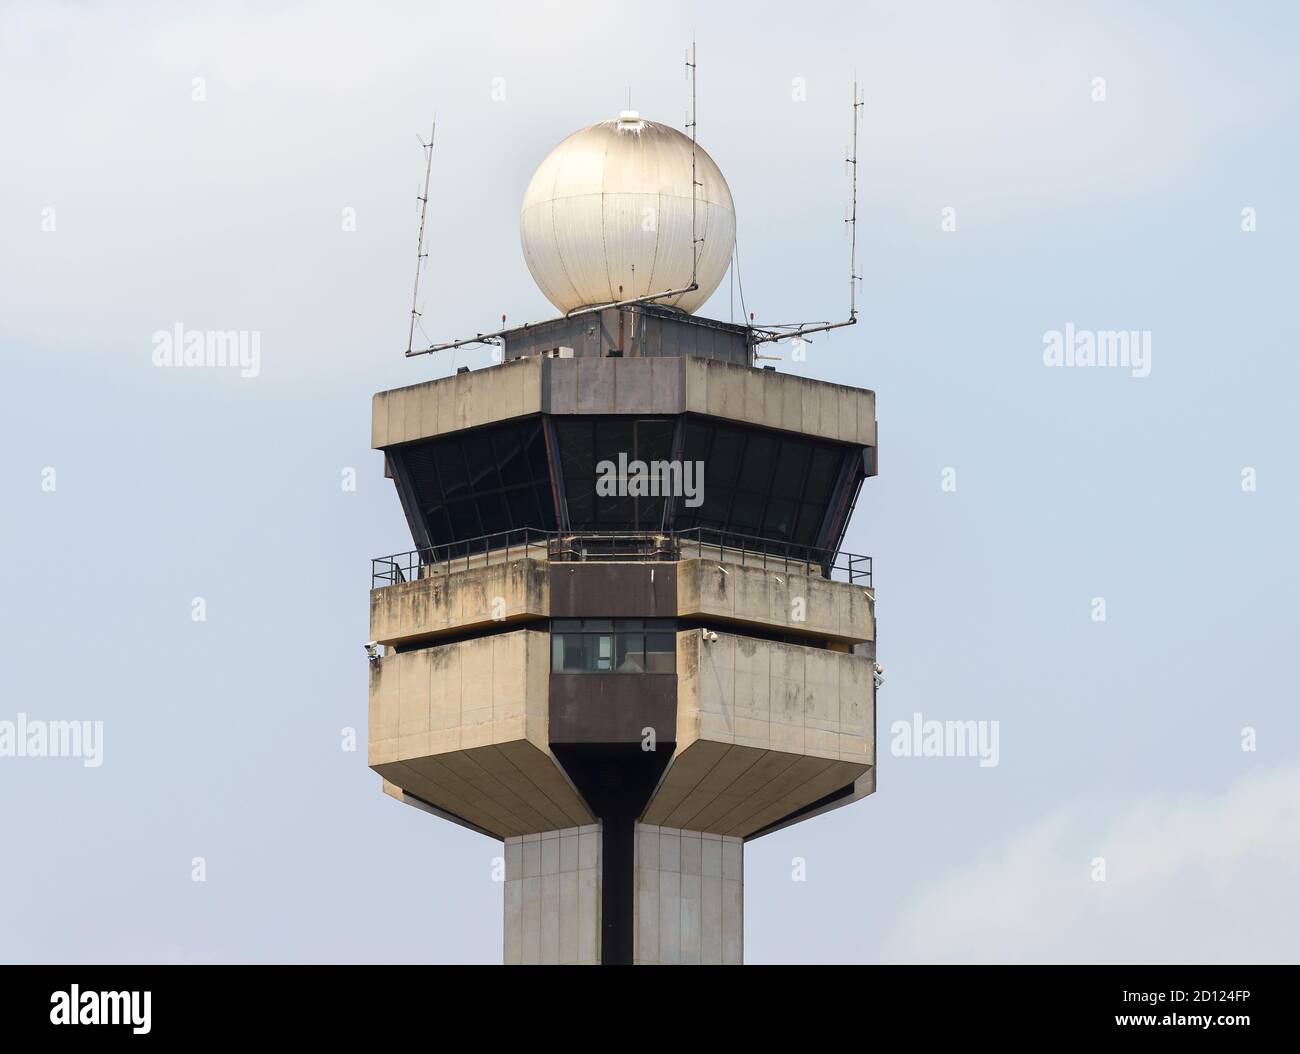 Air Traffic Control Tower of Guarulhos Airport in Sao Paulo, Brazil. ATC Tower of GRU Airport. Stock Photo